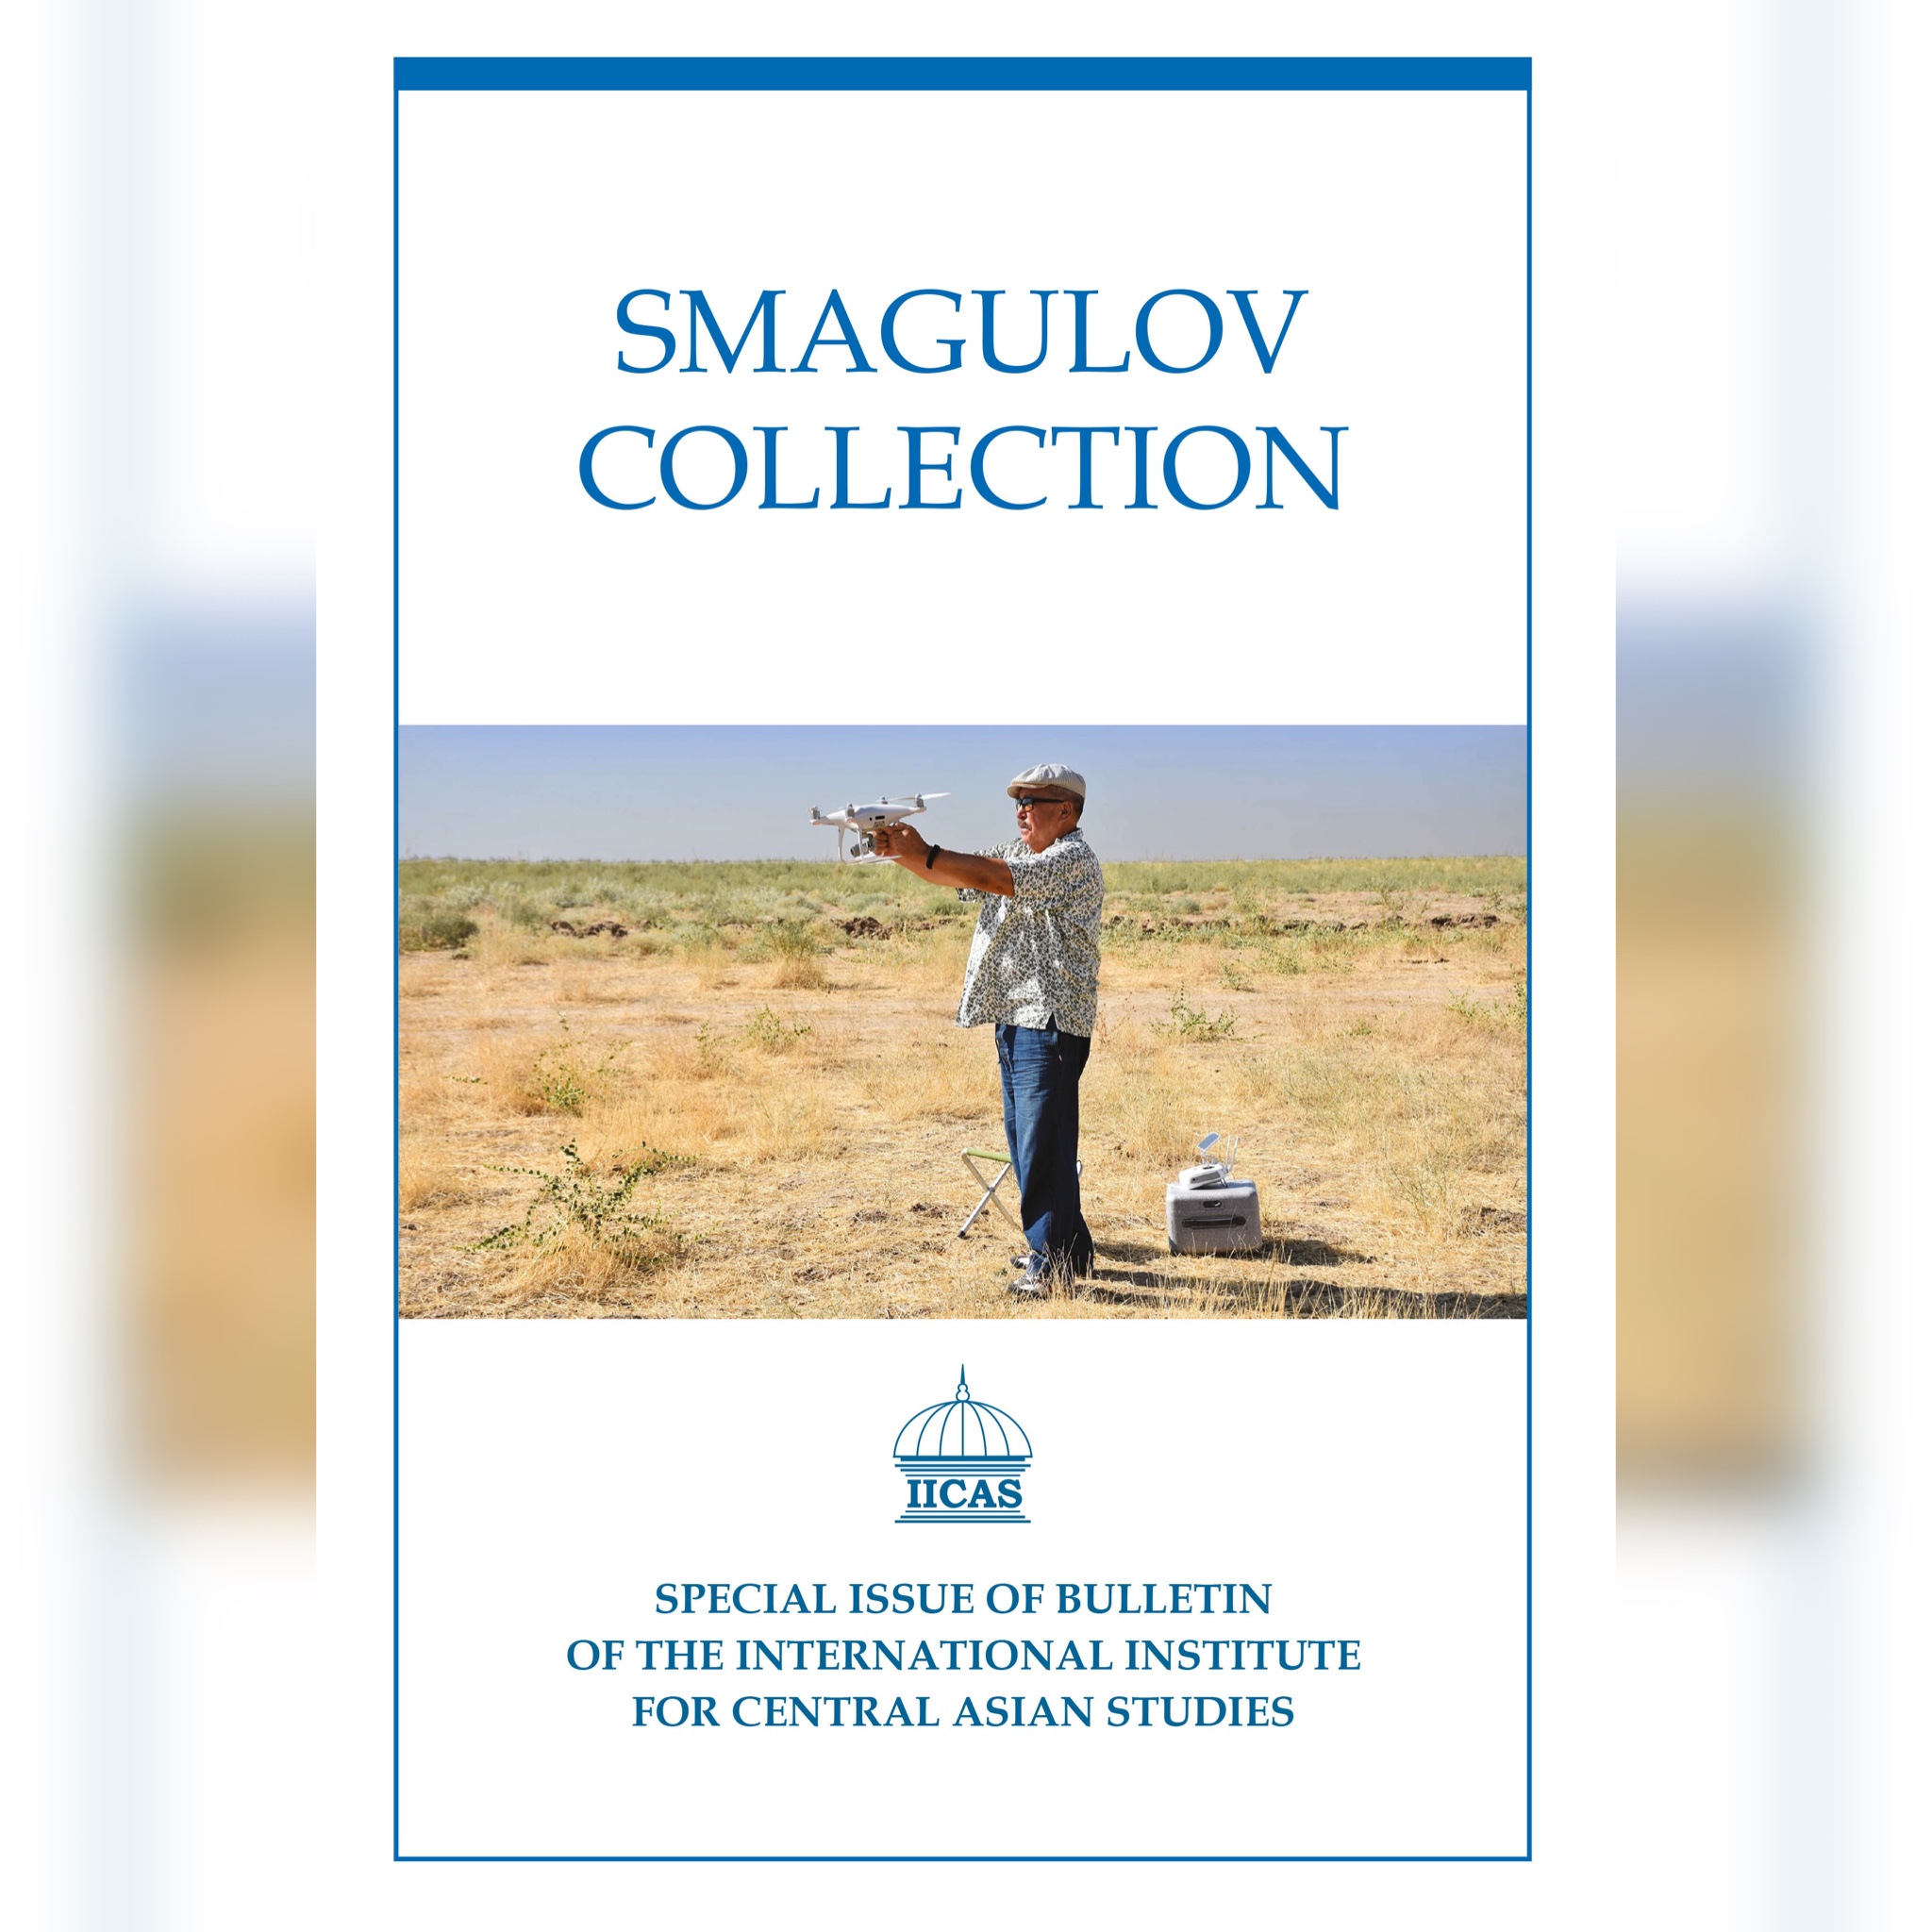 The Smagulov collection